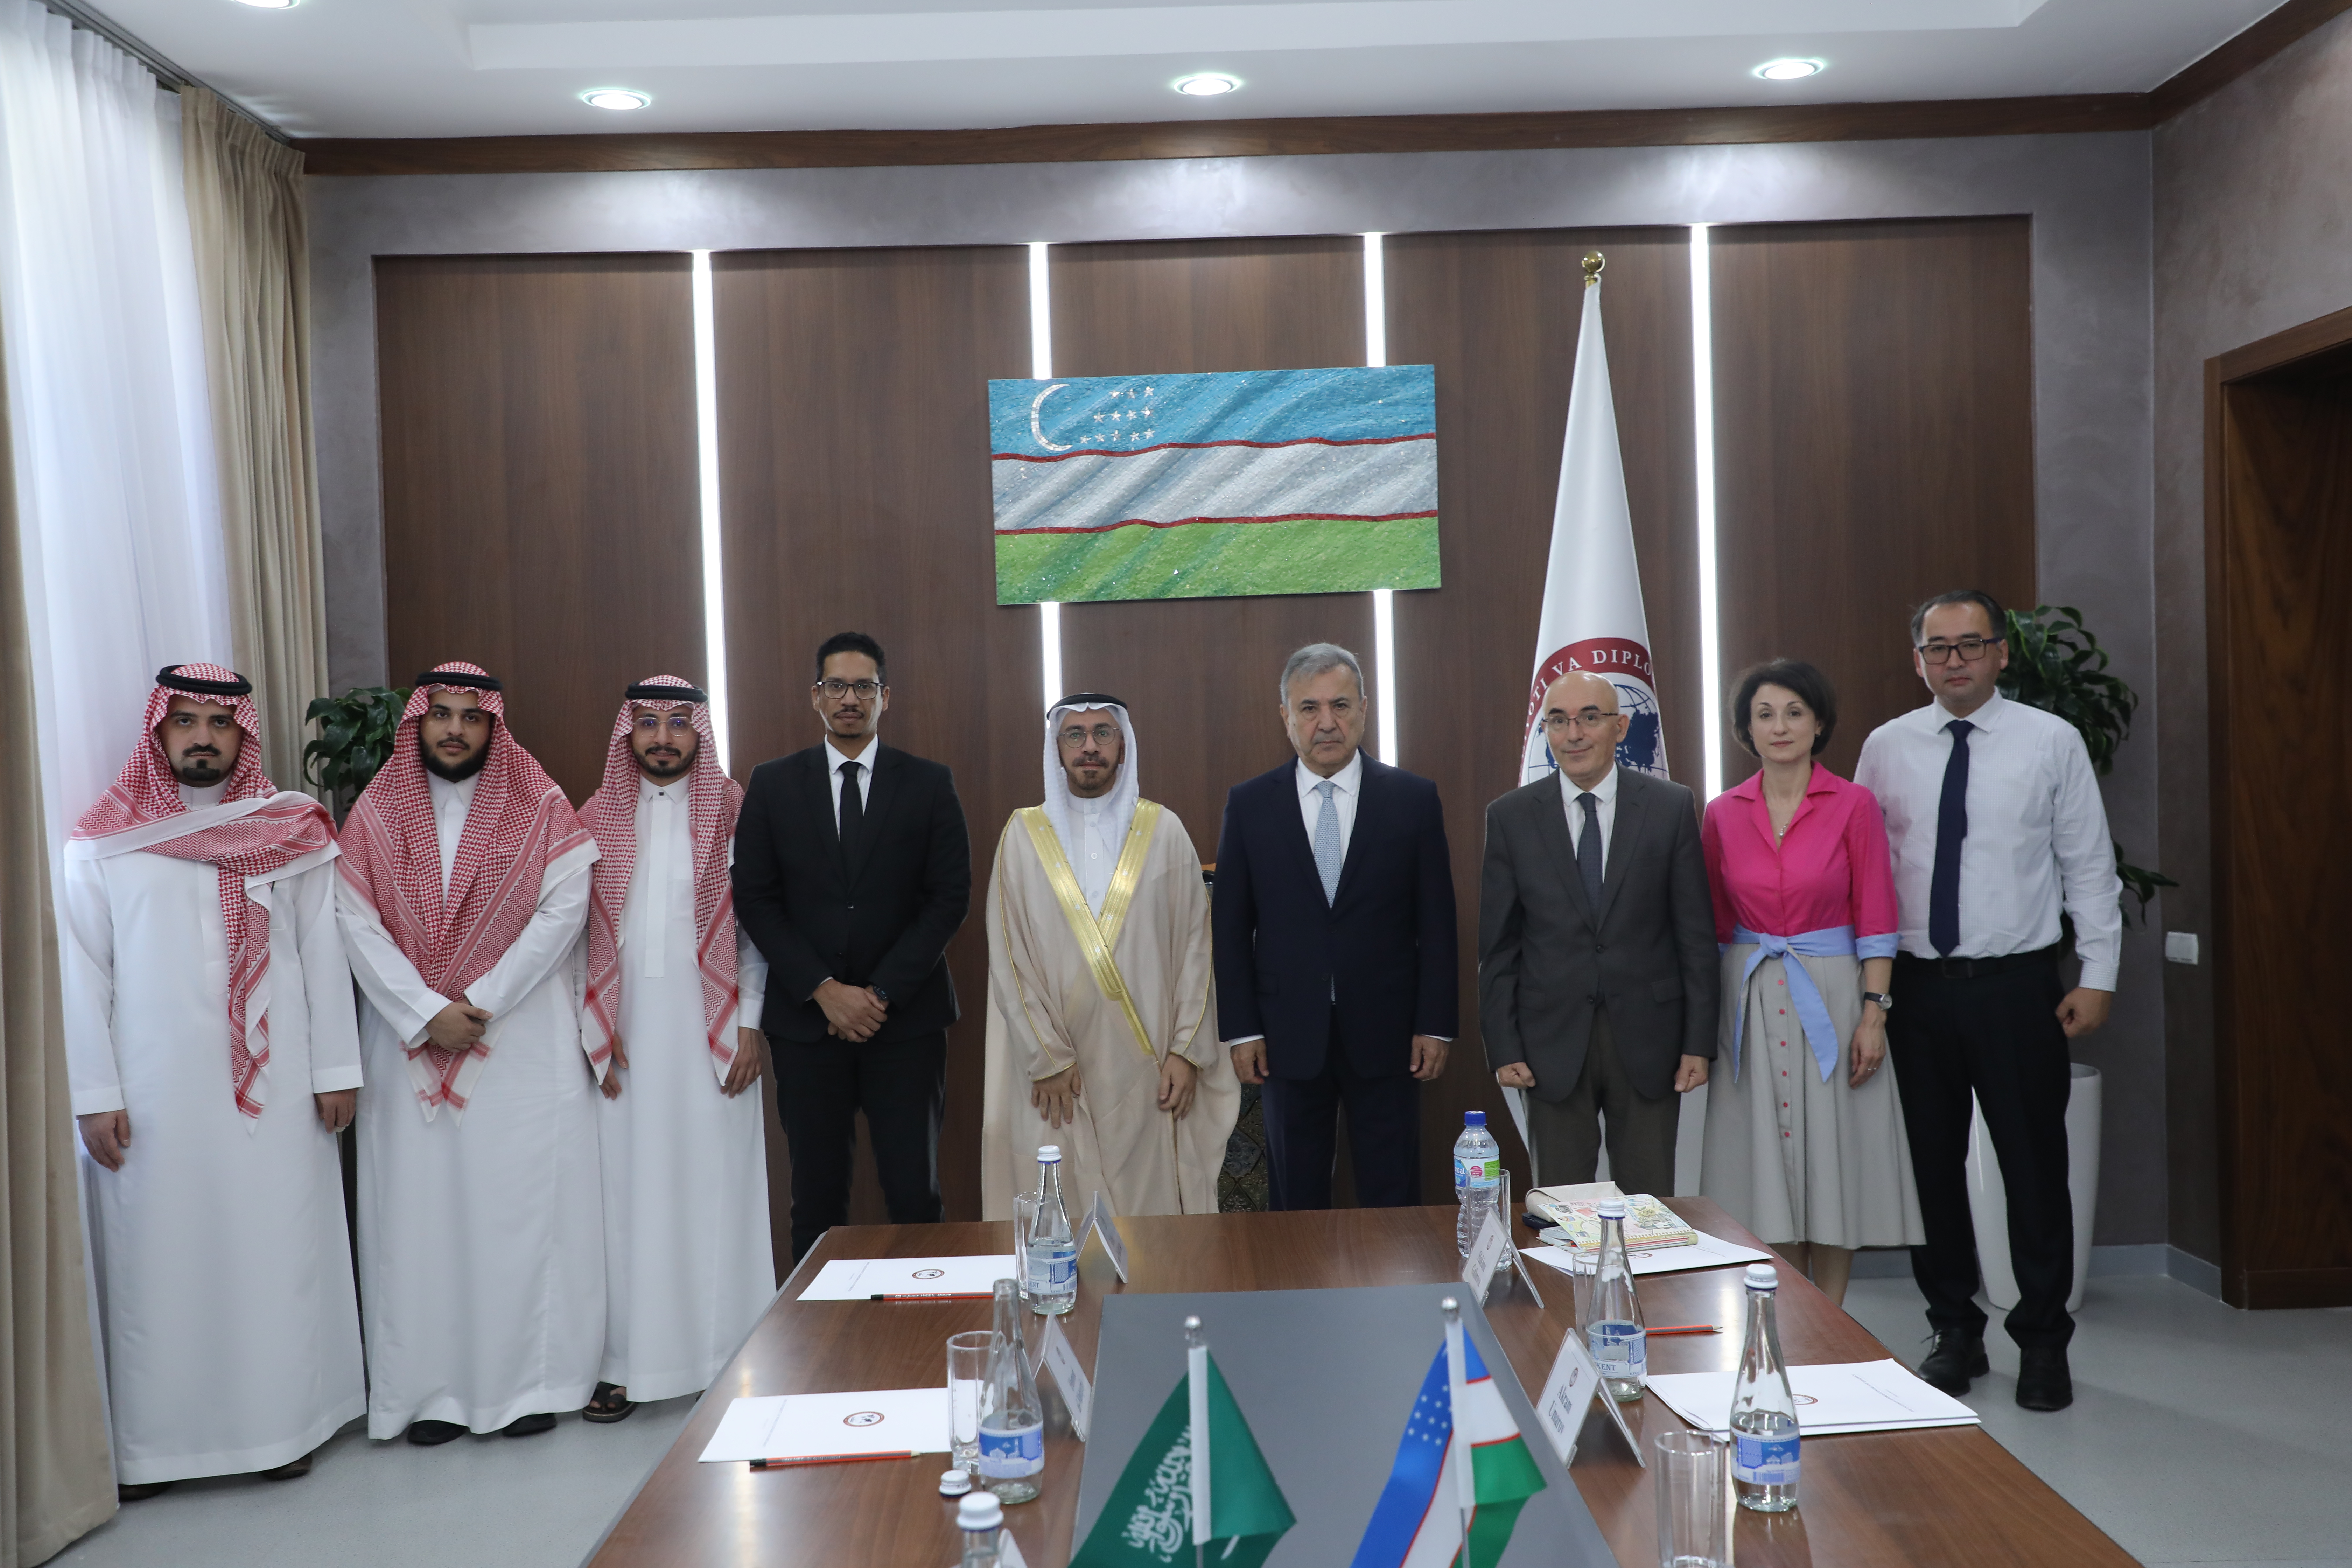 The delegation of the International Academy of the Arabic Language named after King Salman visited UWED